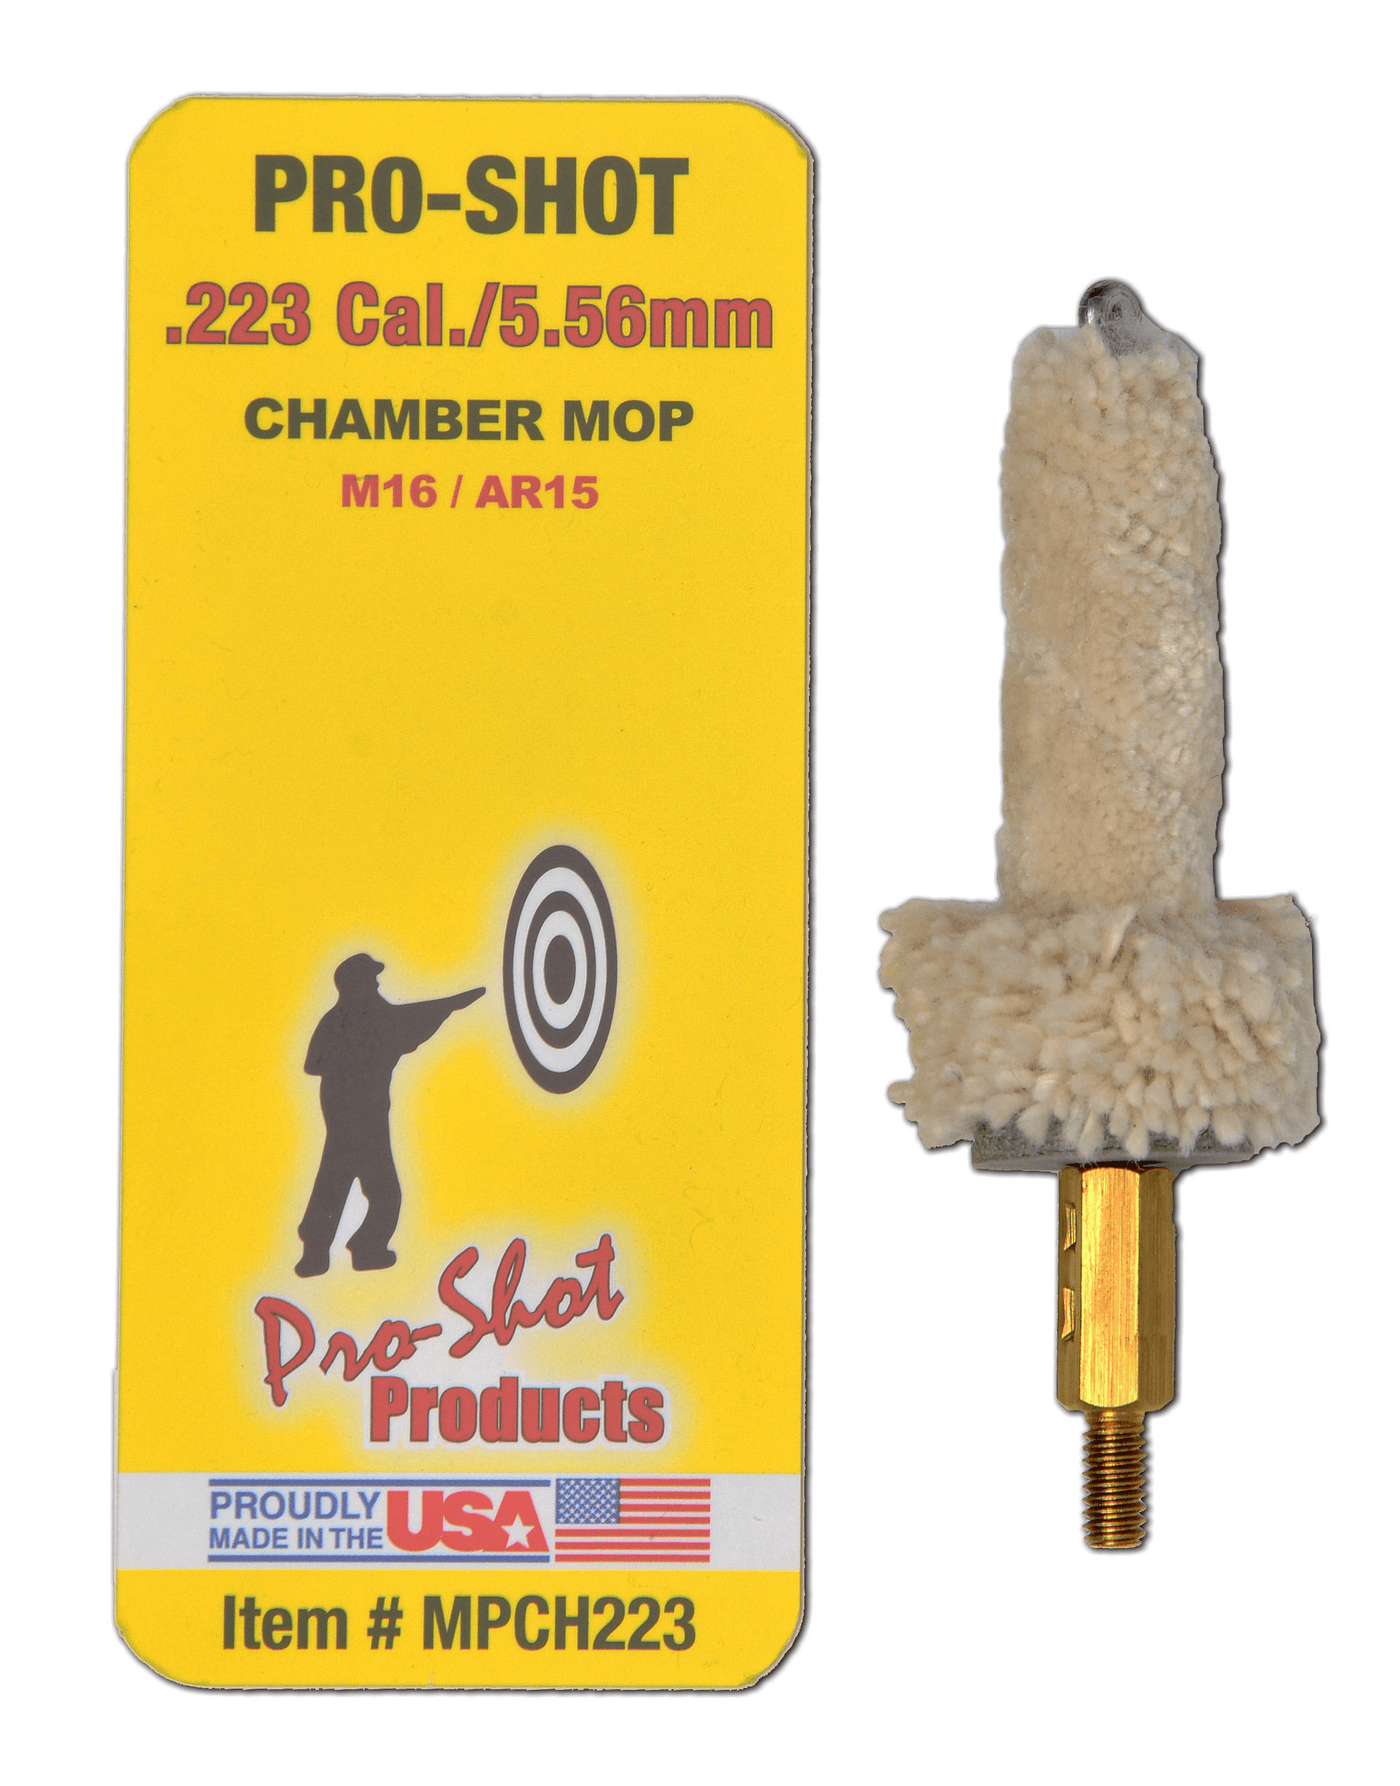 Pro-Shot Products Pro-shot Chamber Mop .223/5.56 Cleaning Equipment